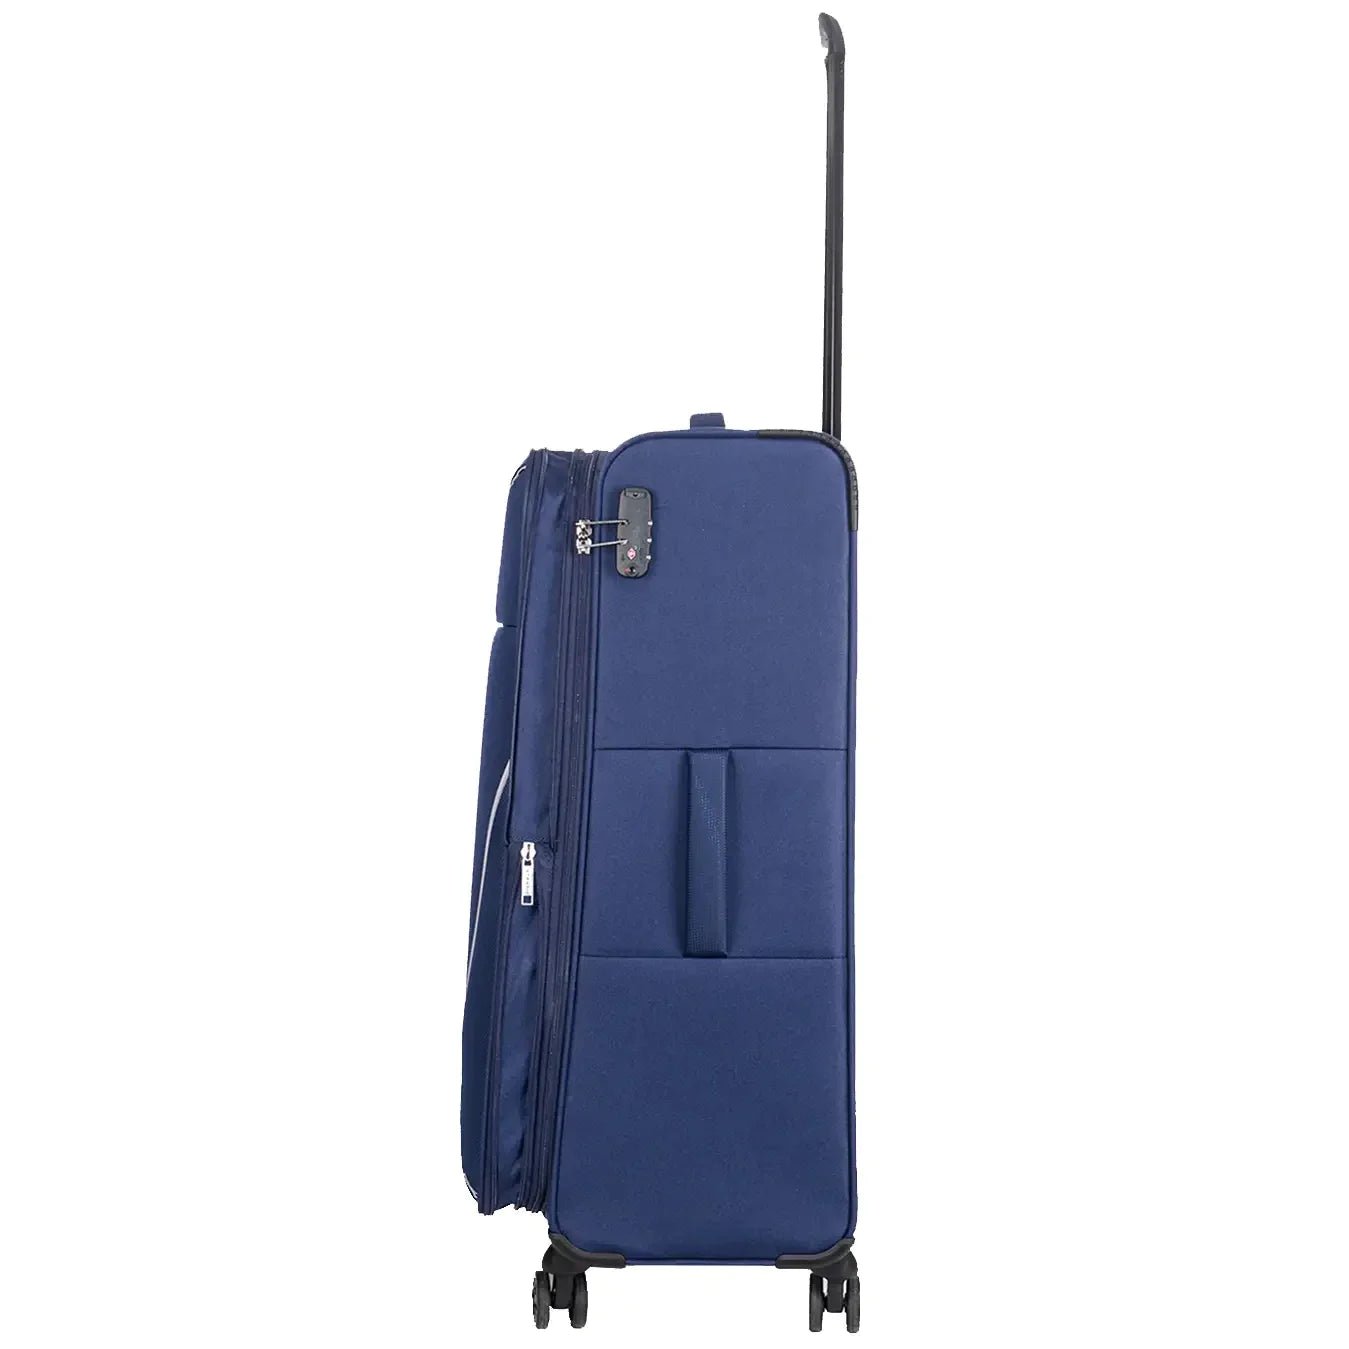 Stratic Strong 4-Rollen Trolley 78 cm - navy